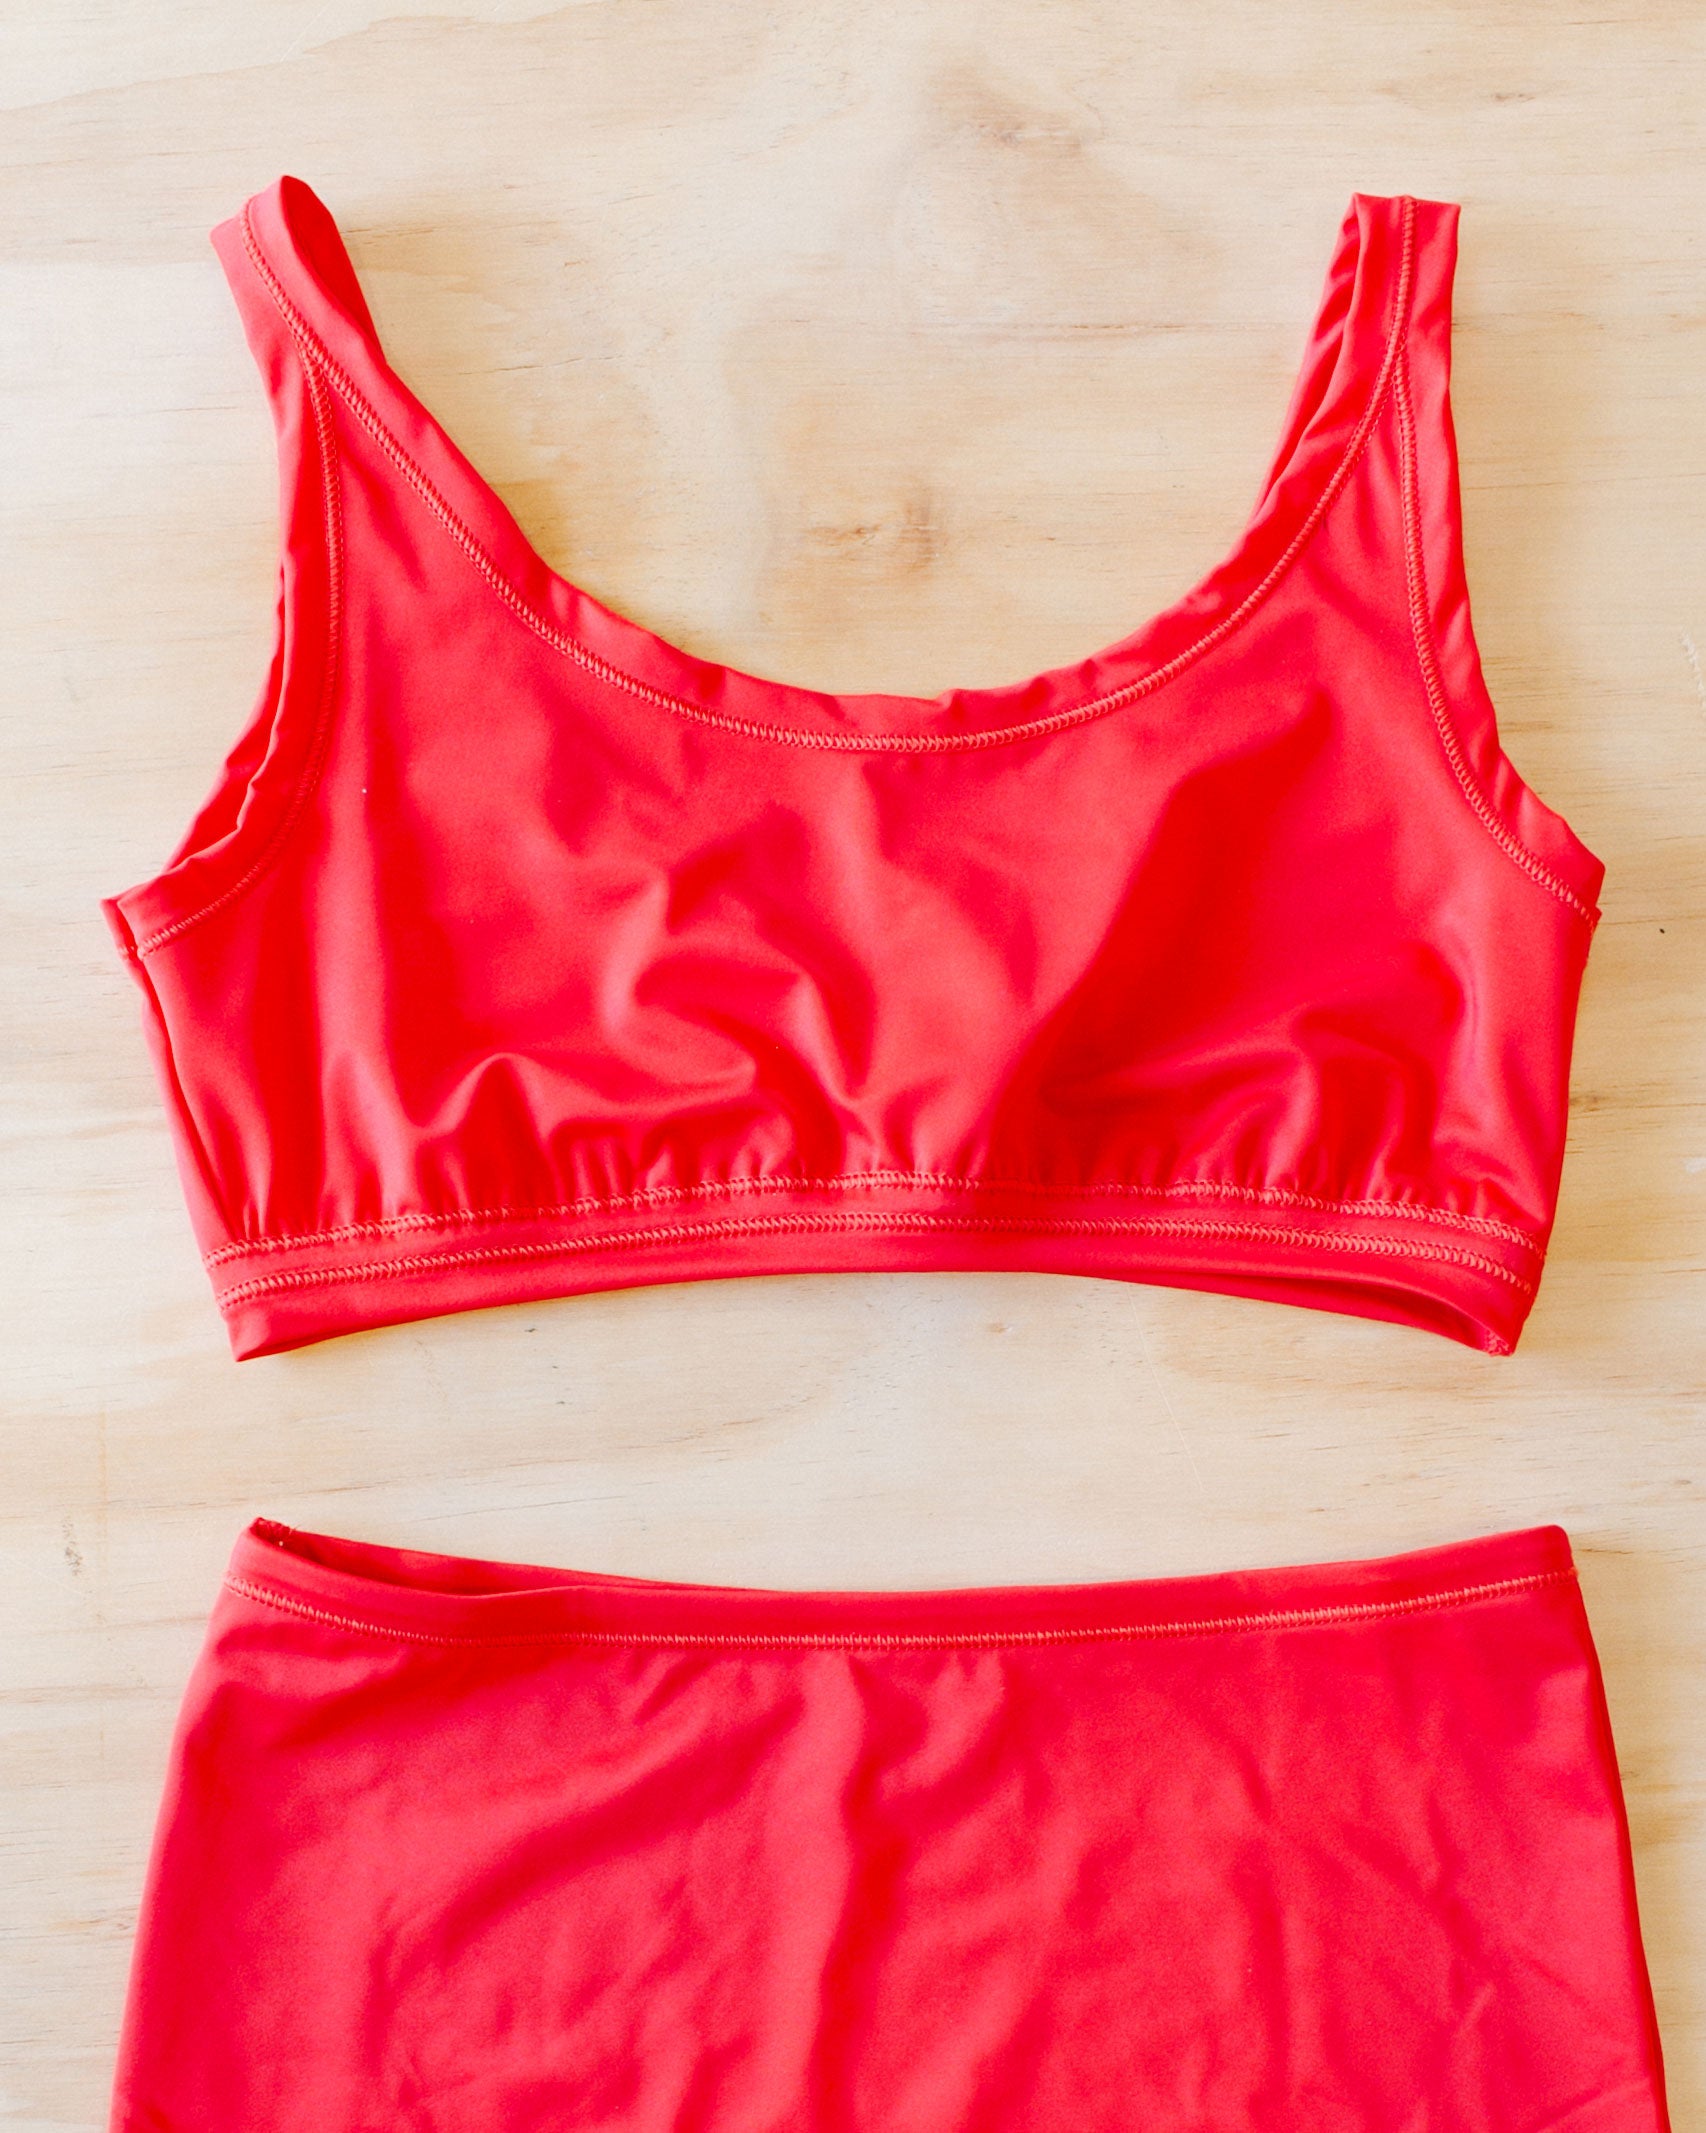 Flat lay on wood surface of Classic Red Swimwear top.